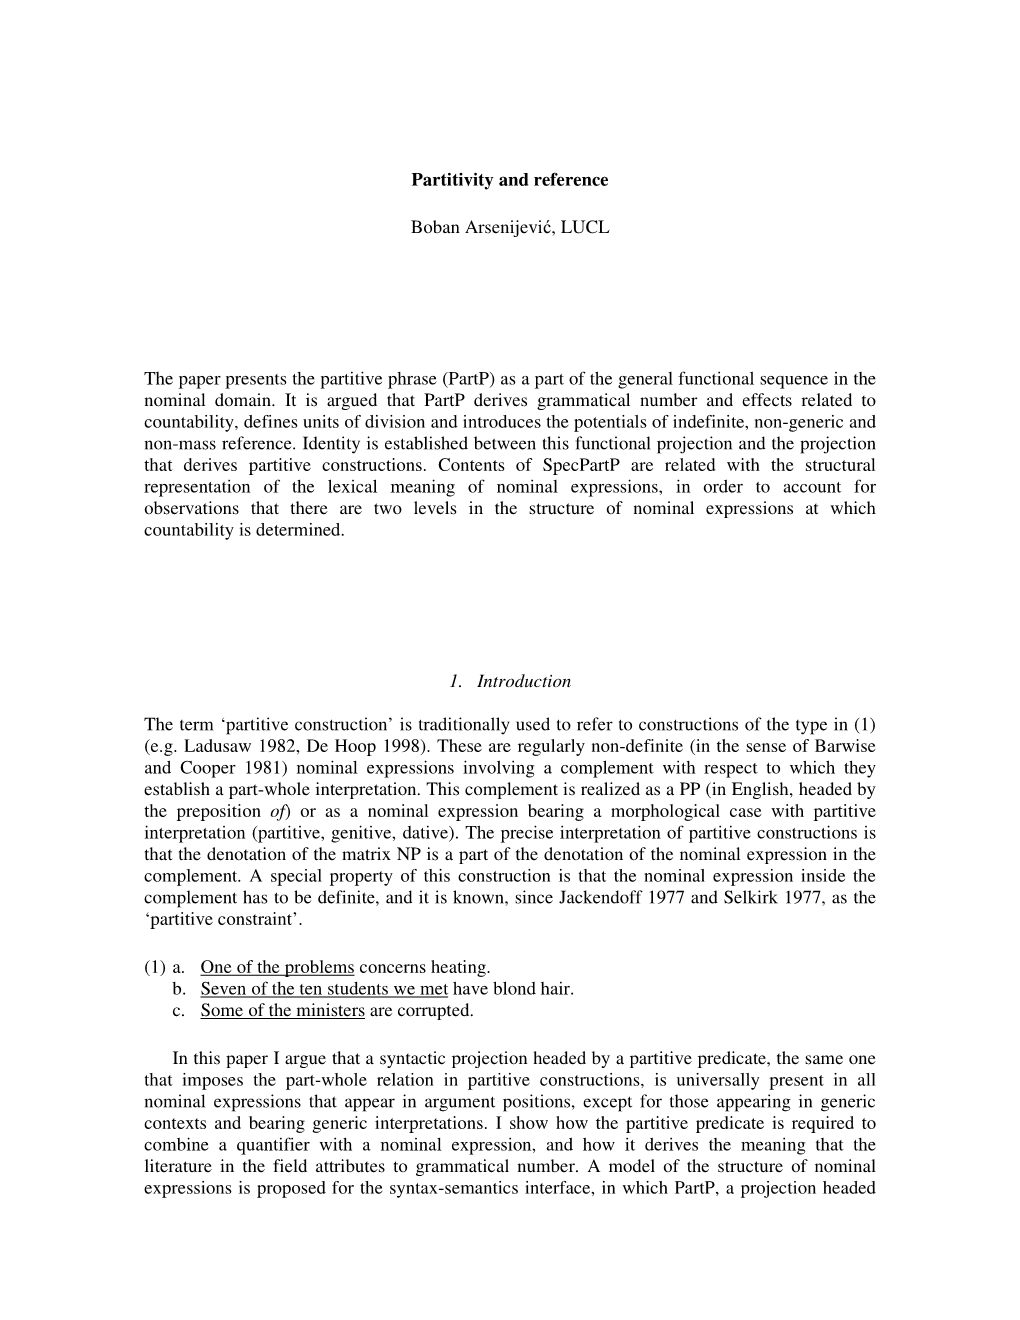 Partitivity and Reference Boban Arsenijević, LUCL the Paper